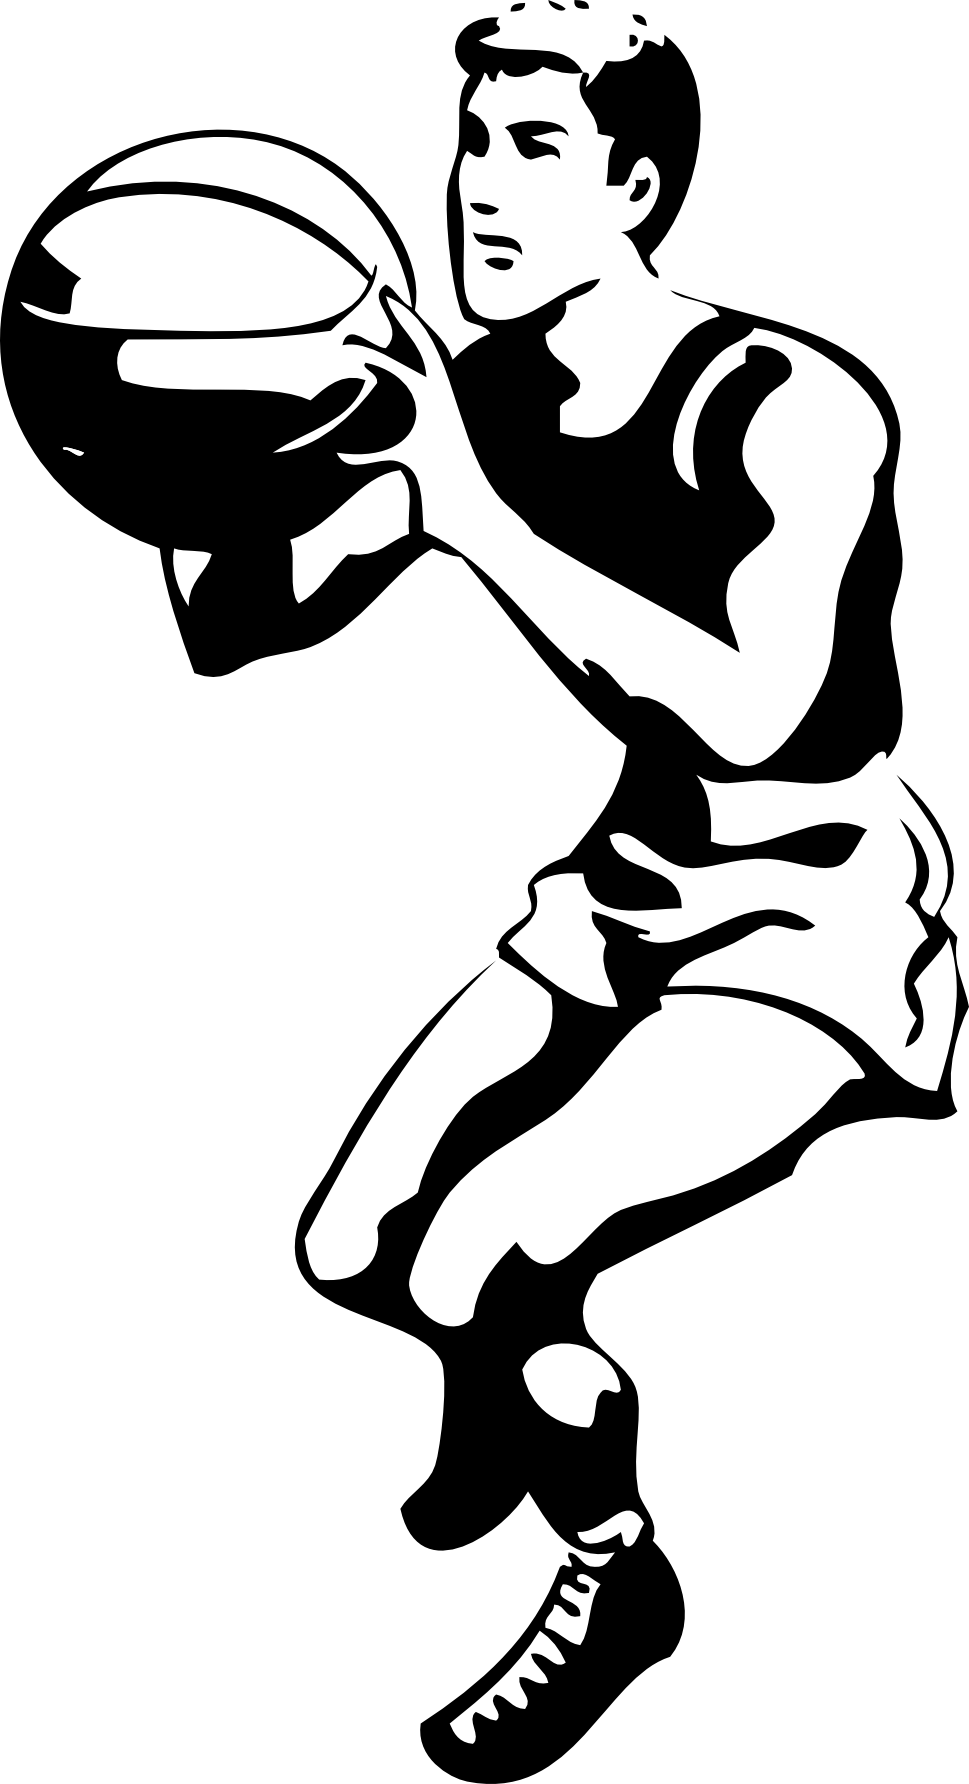 Basketball  black and white black and white images basketball clipart image 4